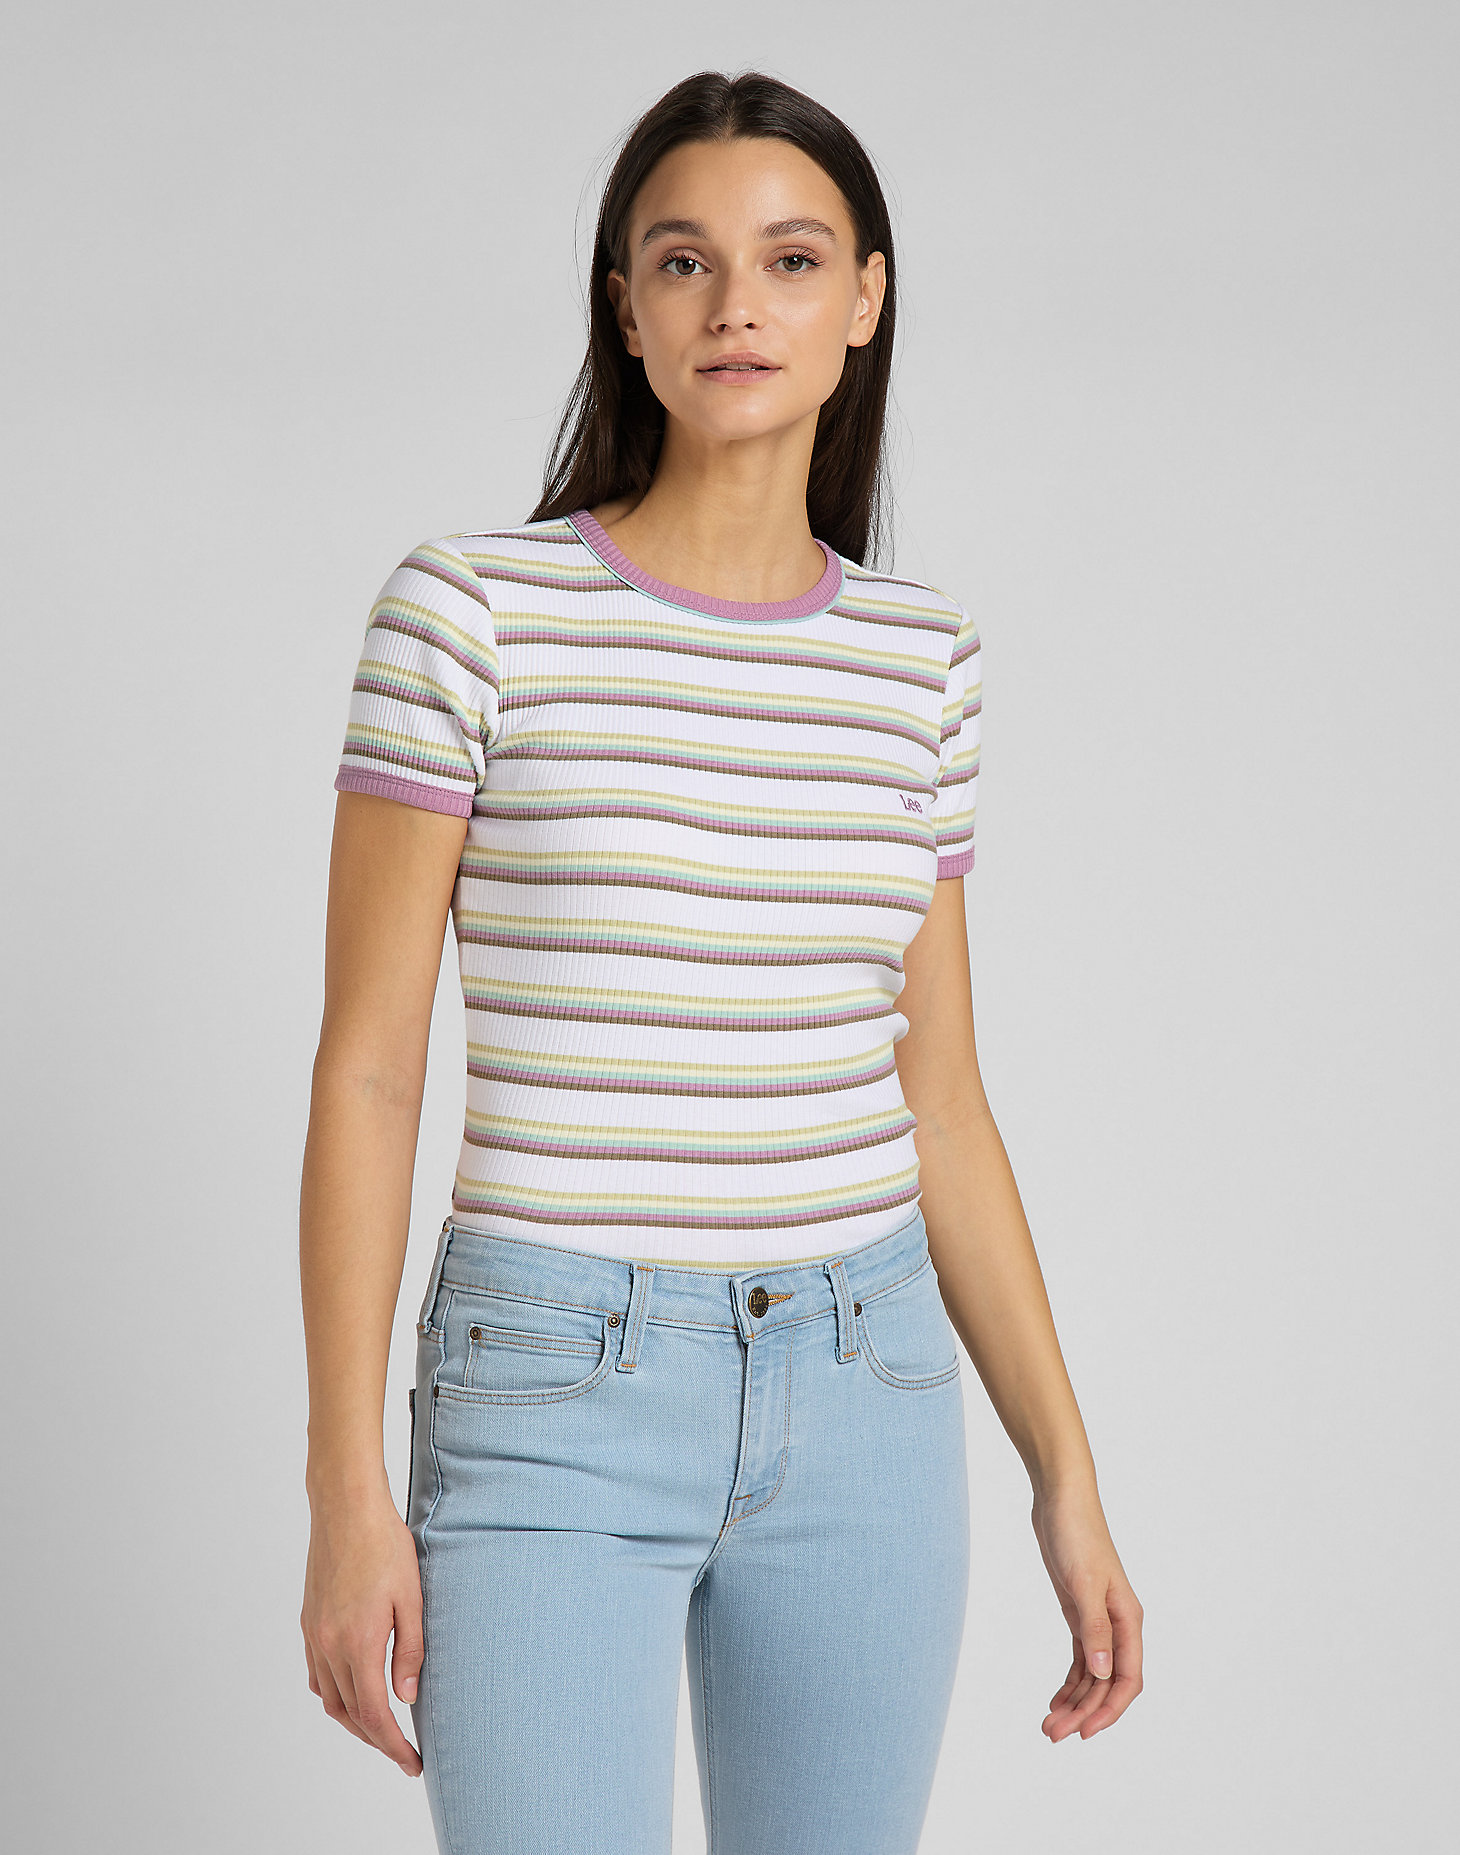 Striped Ribbed Tee in Plum alternative view 2